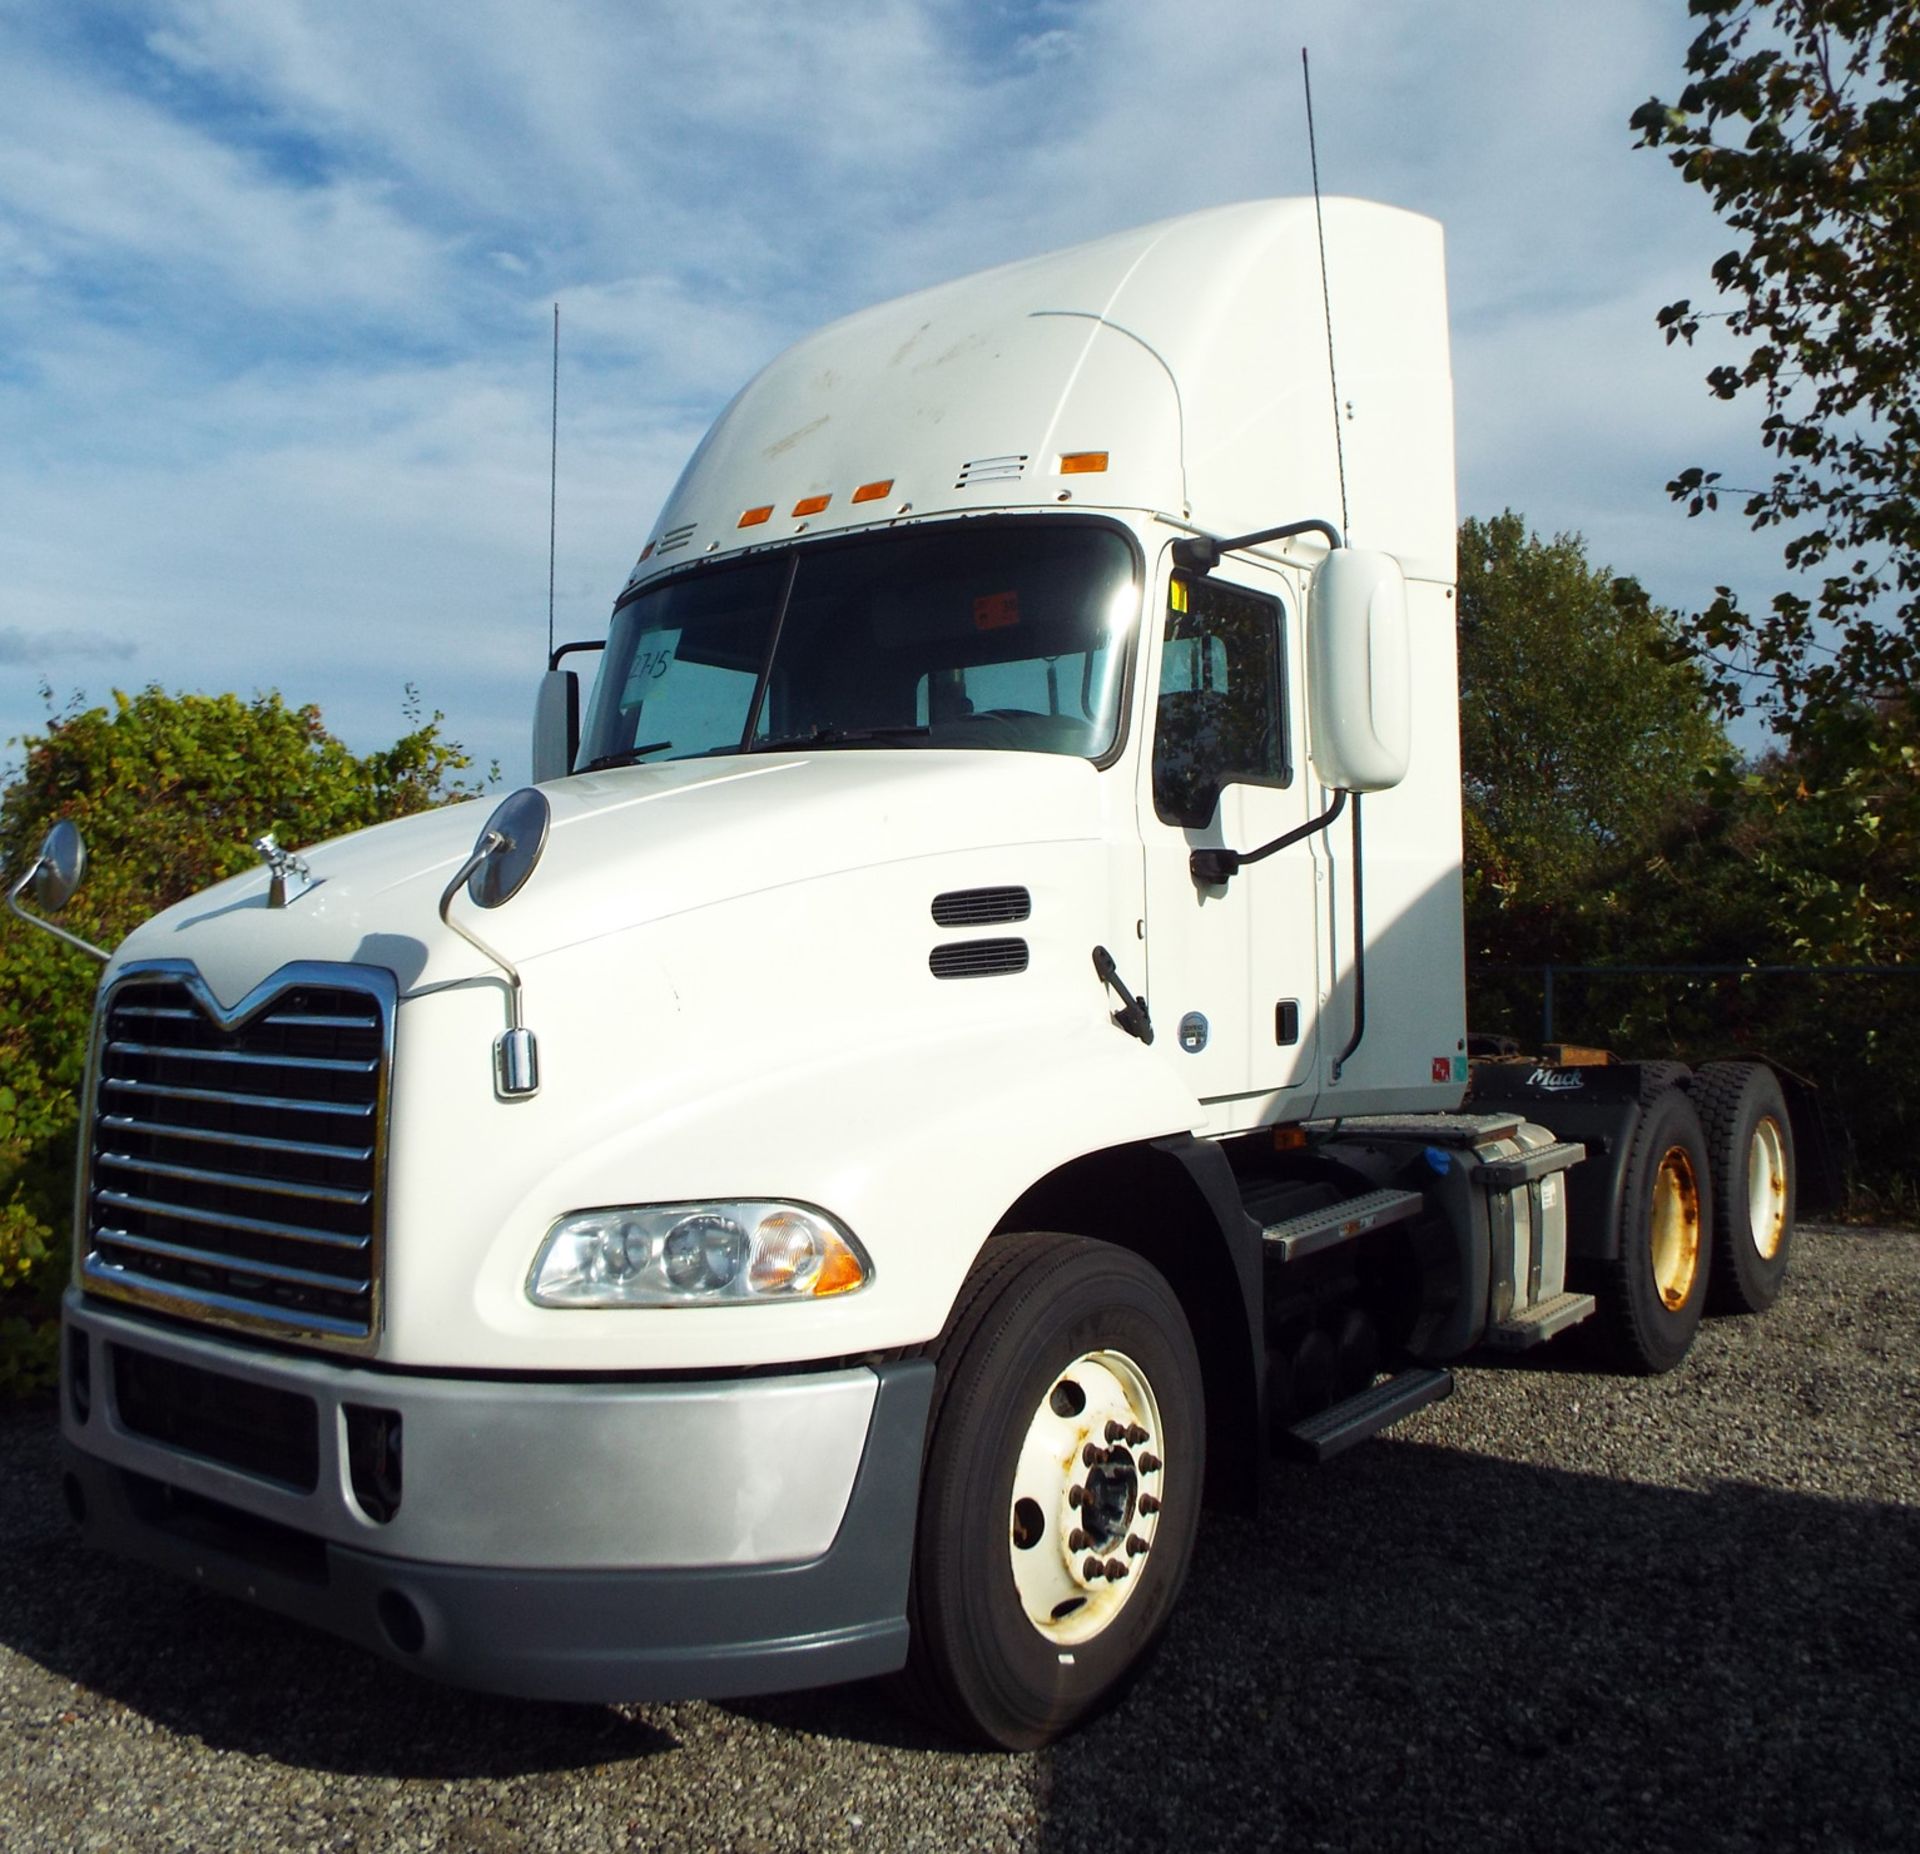 MACK (2015) CXU613 DAY CAB TRUCK WITH 405HP MP7 DIESEL ENGINE, 10 SPEED EATON FULLER TRANSMISSION, - Image 2 of 13